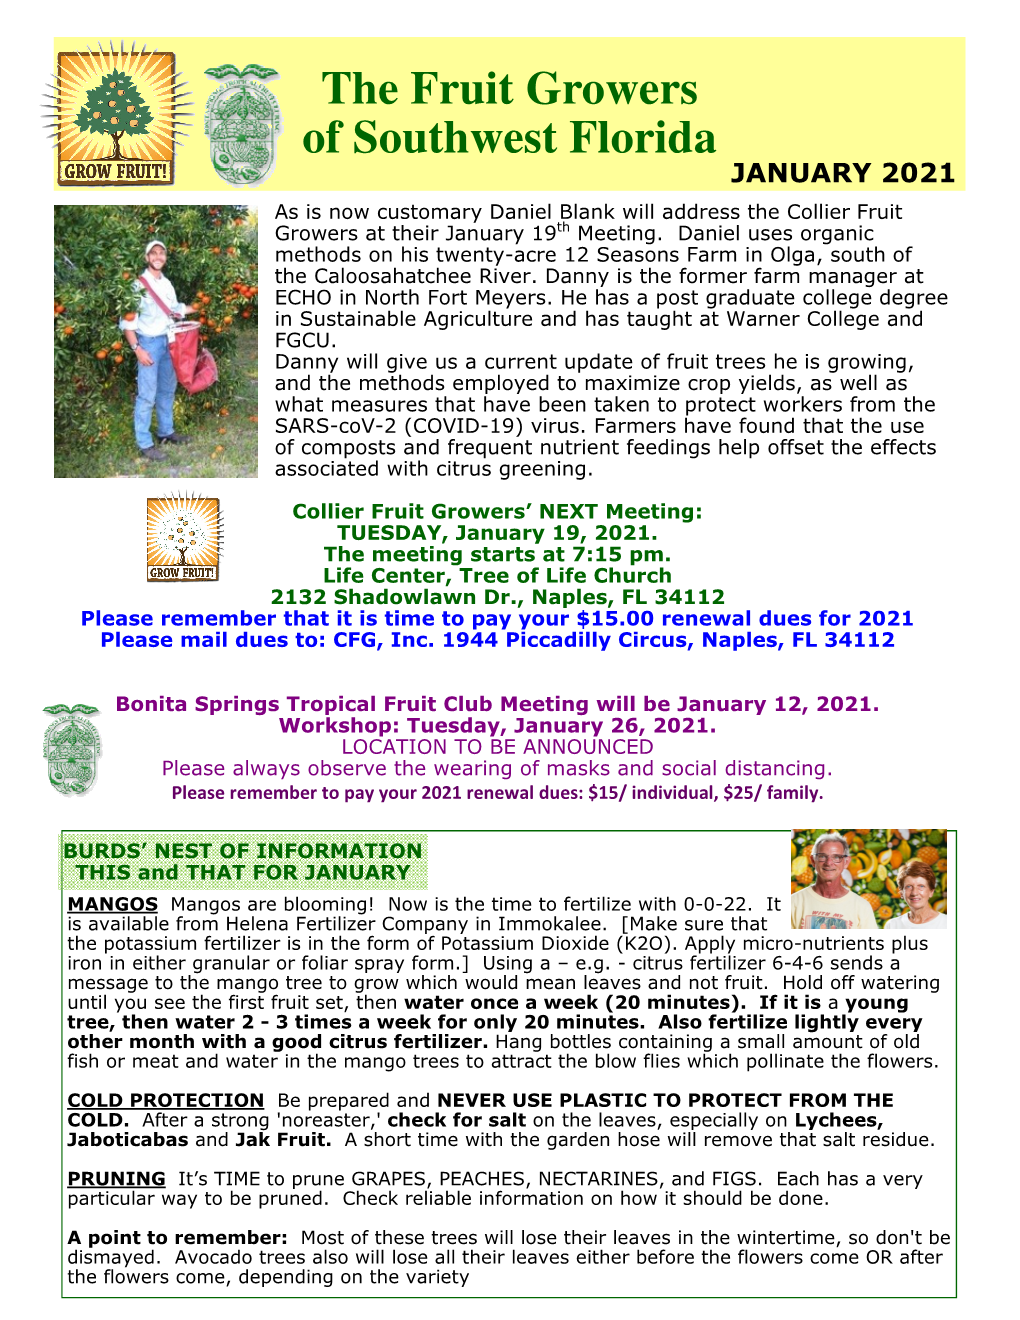 JANUARY 2021 As Is Now Customary Daniel Blank Will Address the Collier Fruit Growers at Their January 19 Th Meeting